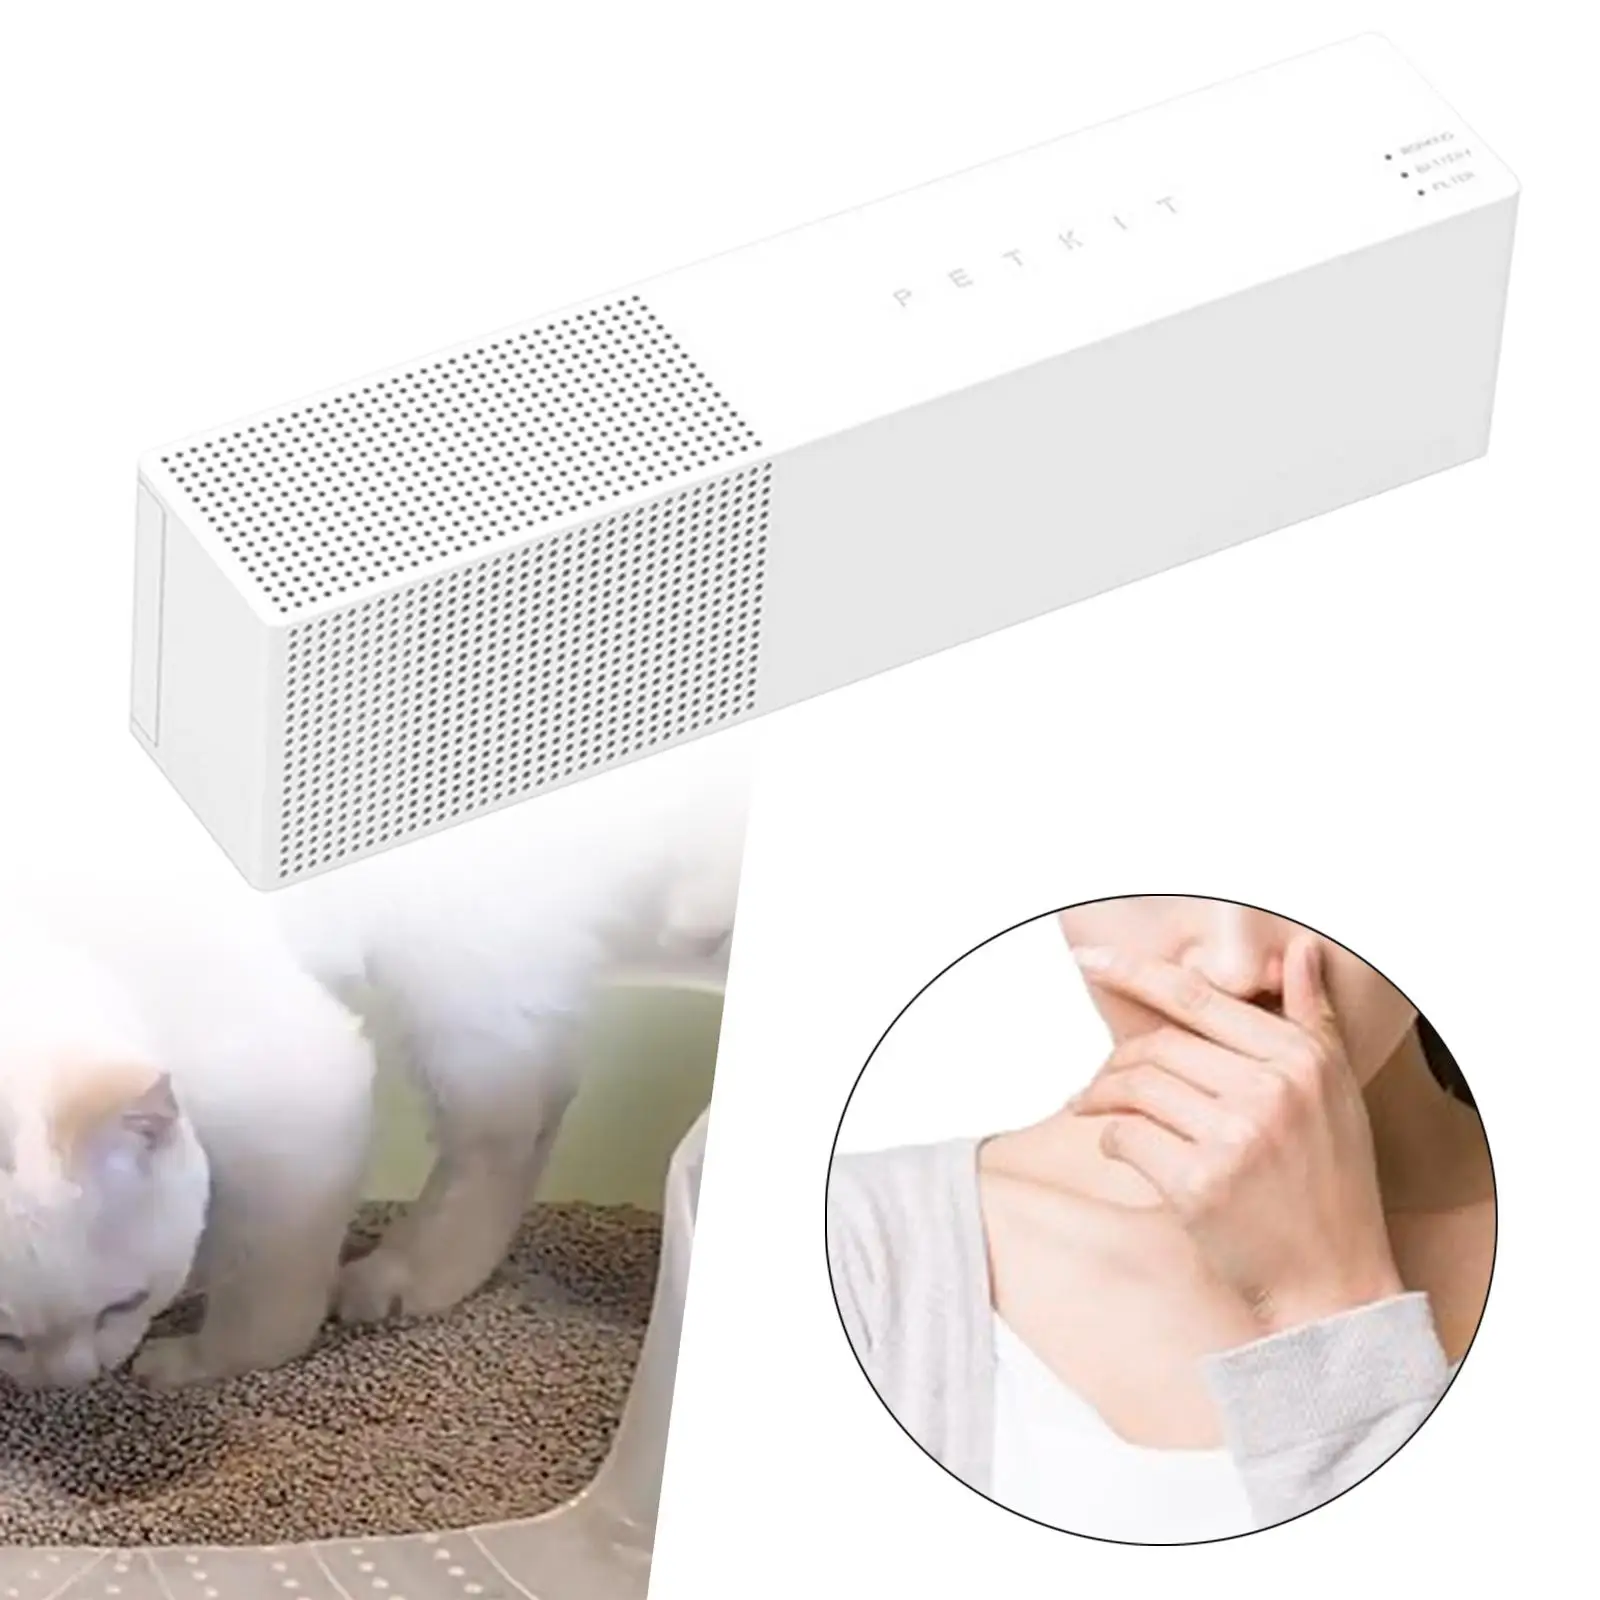 Pets Odor Eliminator Cat Litter Freshener Portable Pets Deodorization Wall Mounted Cat Litter Odor Remover for Home